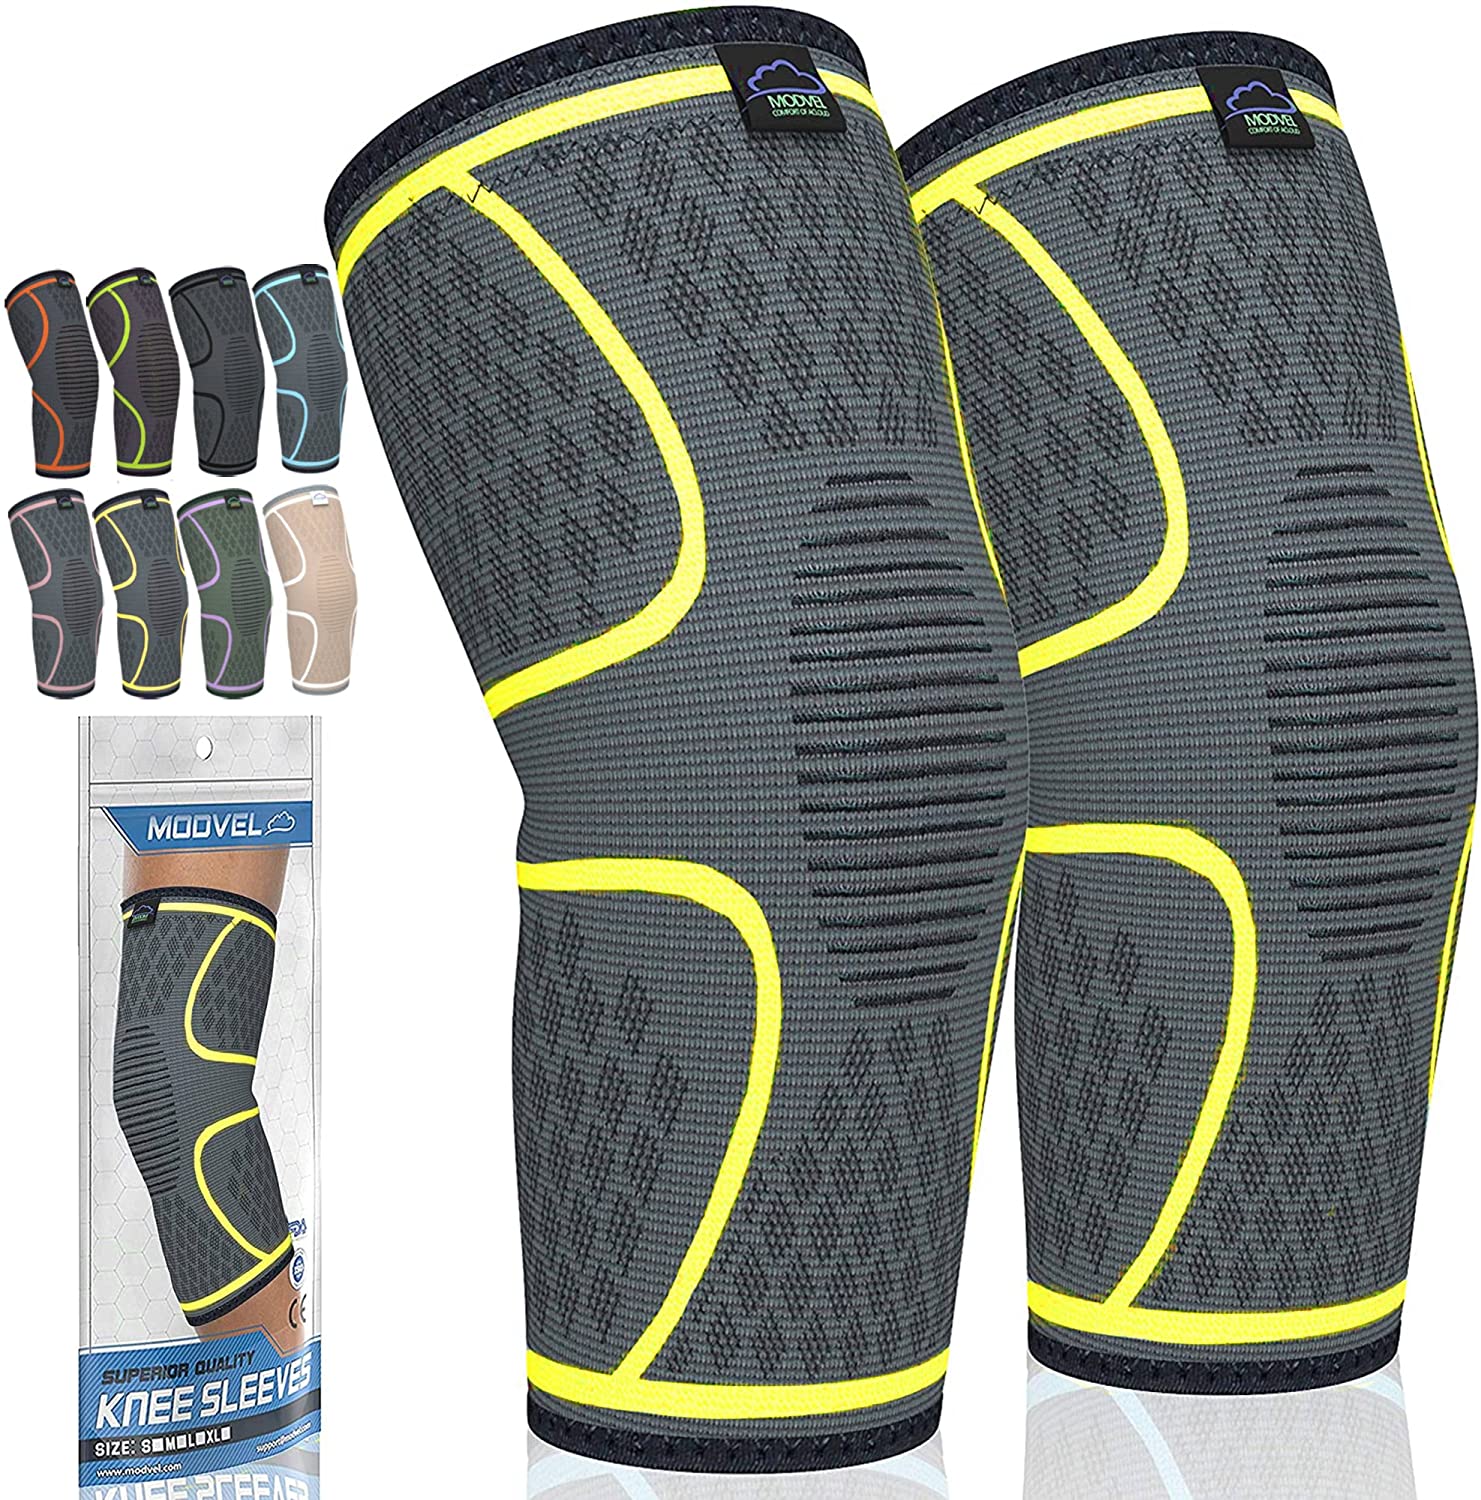 Modvel Compression Knee Sleeve (S/M/L/XL) $9.50 each at Amazon